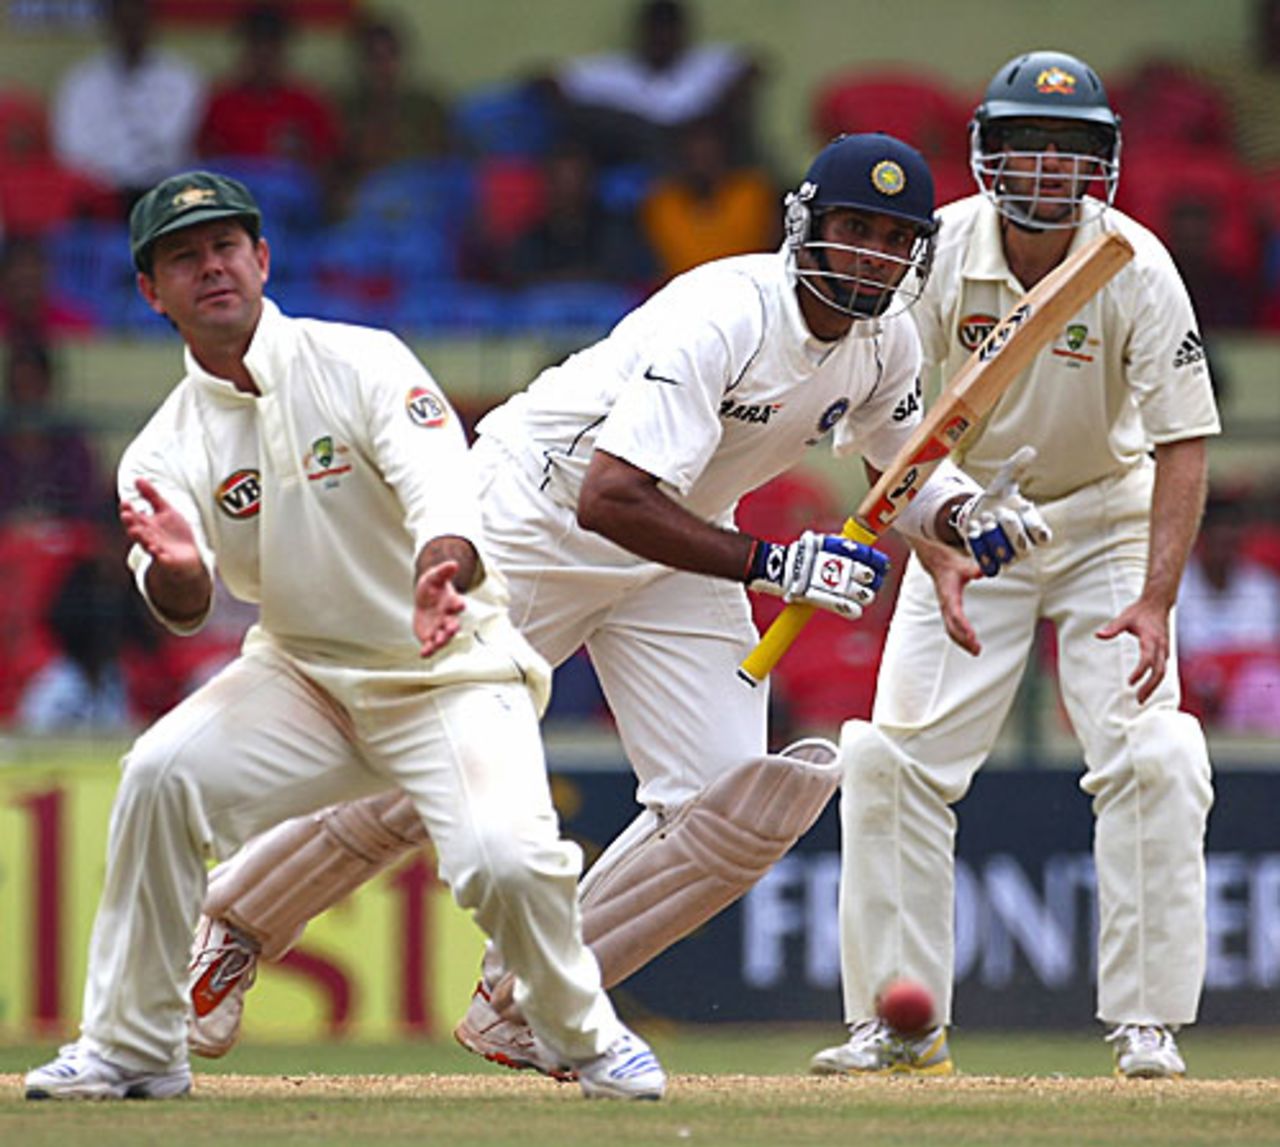 VVS Laxman drives past the close-in fielders, India v Australia, 1st Test, Bangalore, 5th day, October 13, 2008